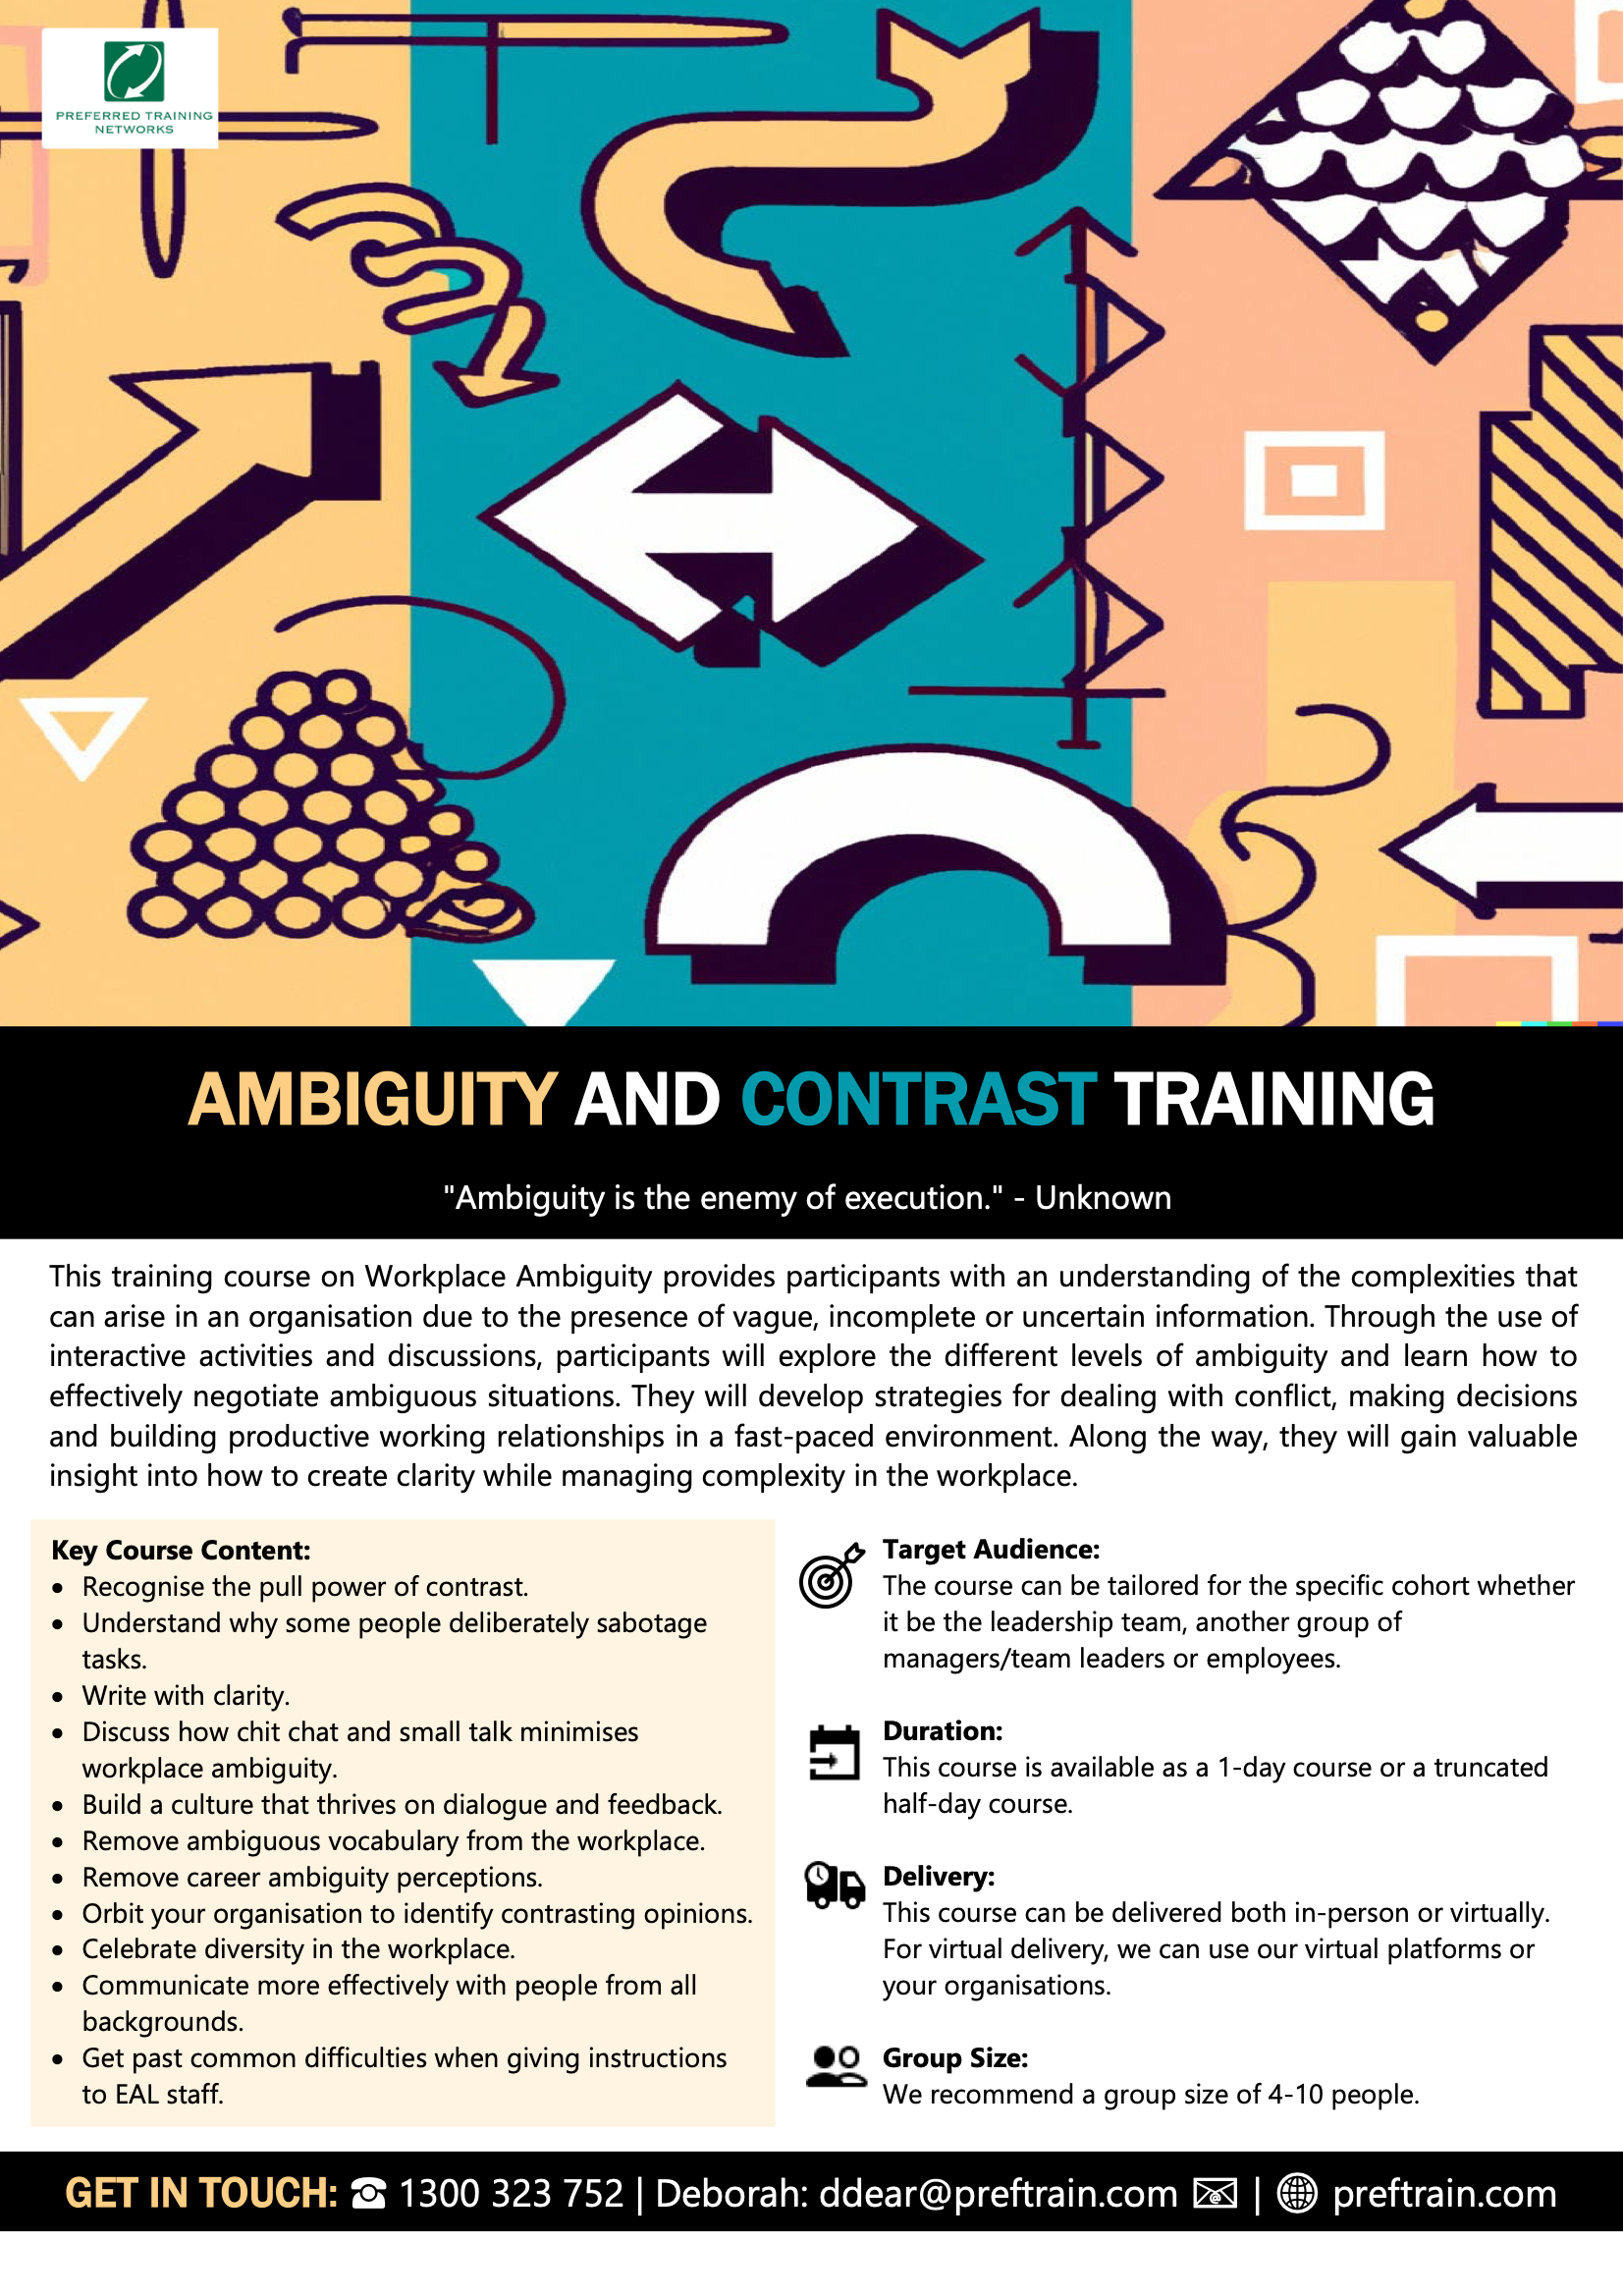 Ambiguity and Contrast Training